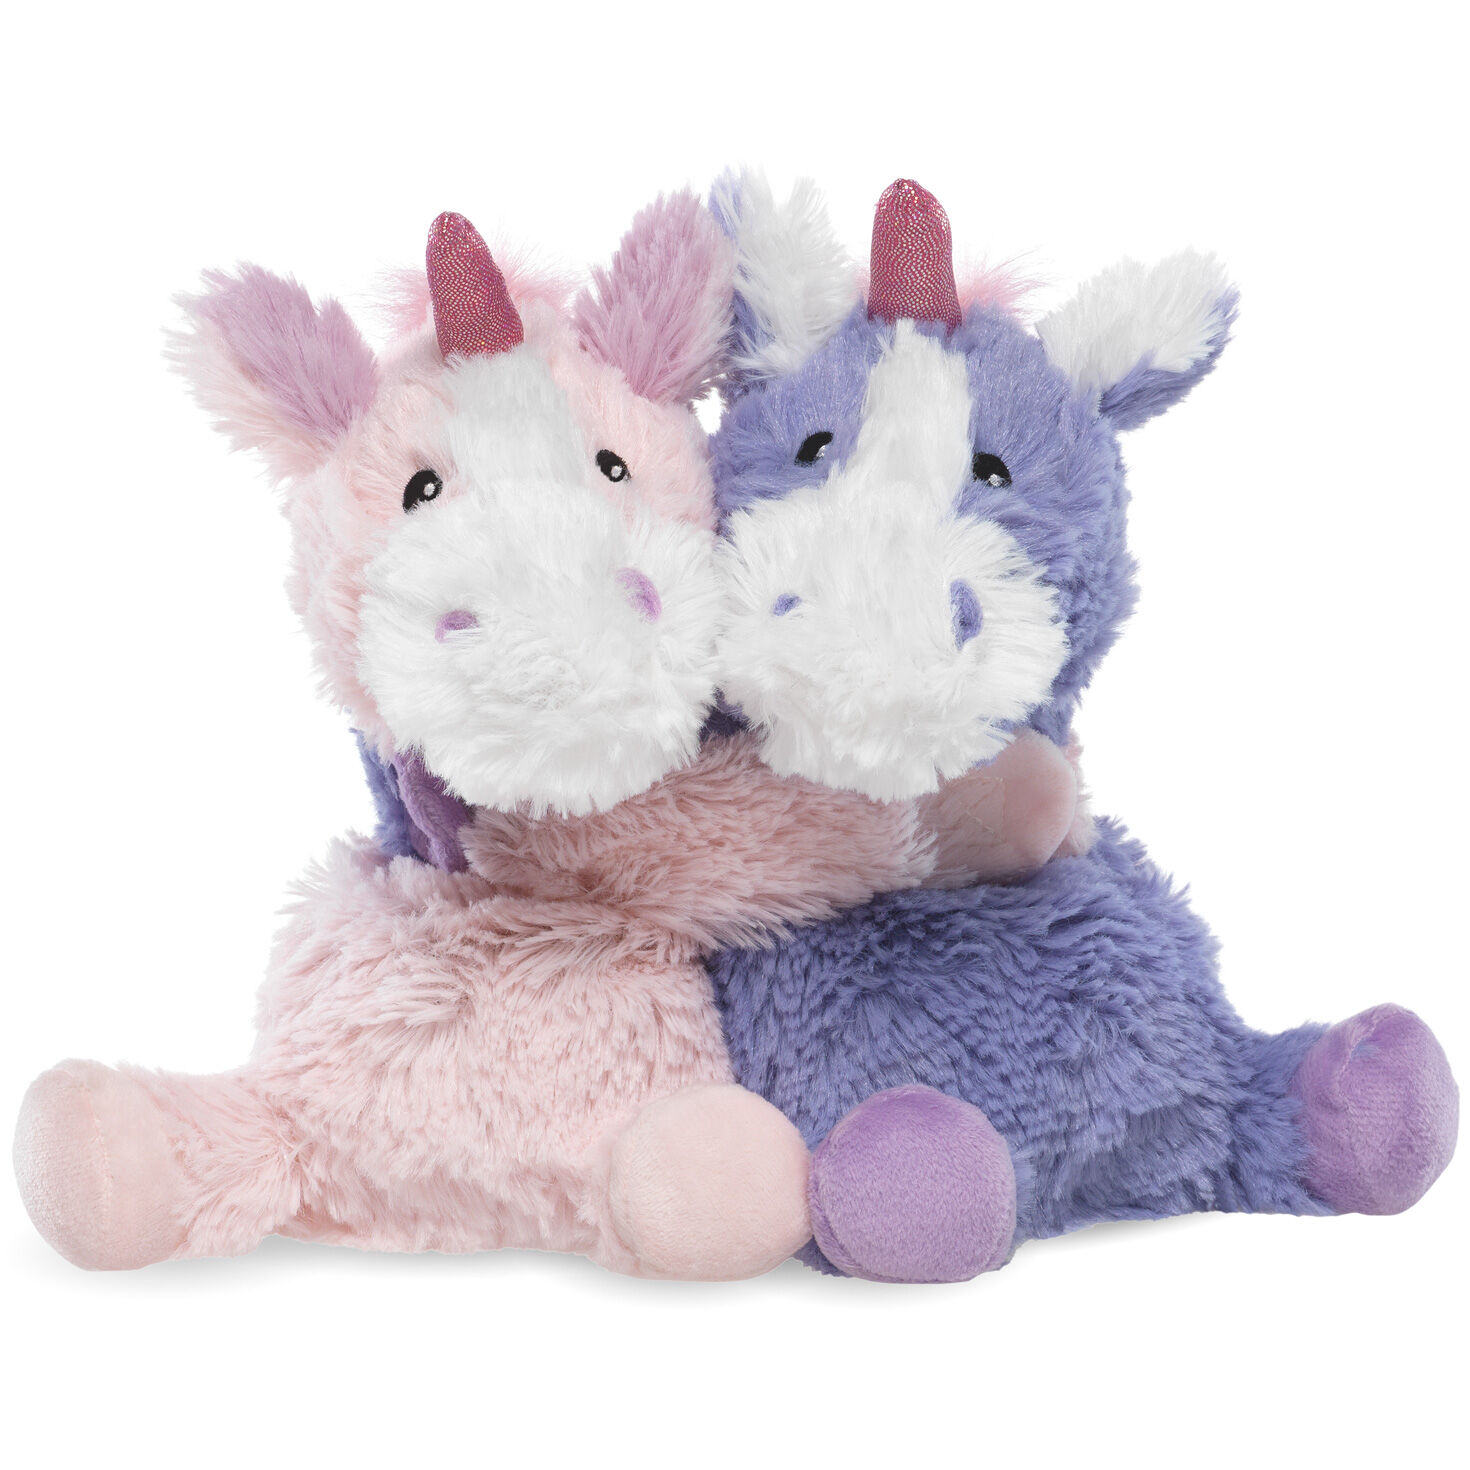 Aroma Home Microwave Cuddly Toy Purple Unicorn Cozy Hot Lavender Heat Pack Gift 